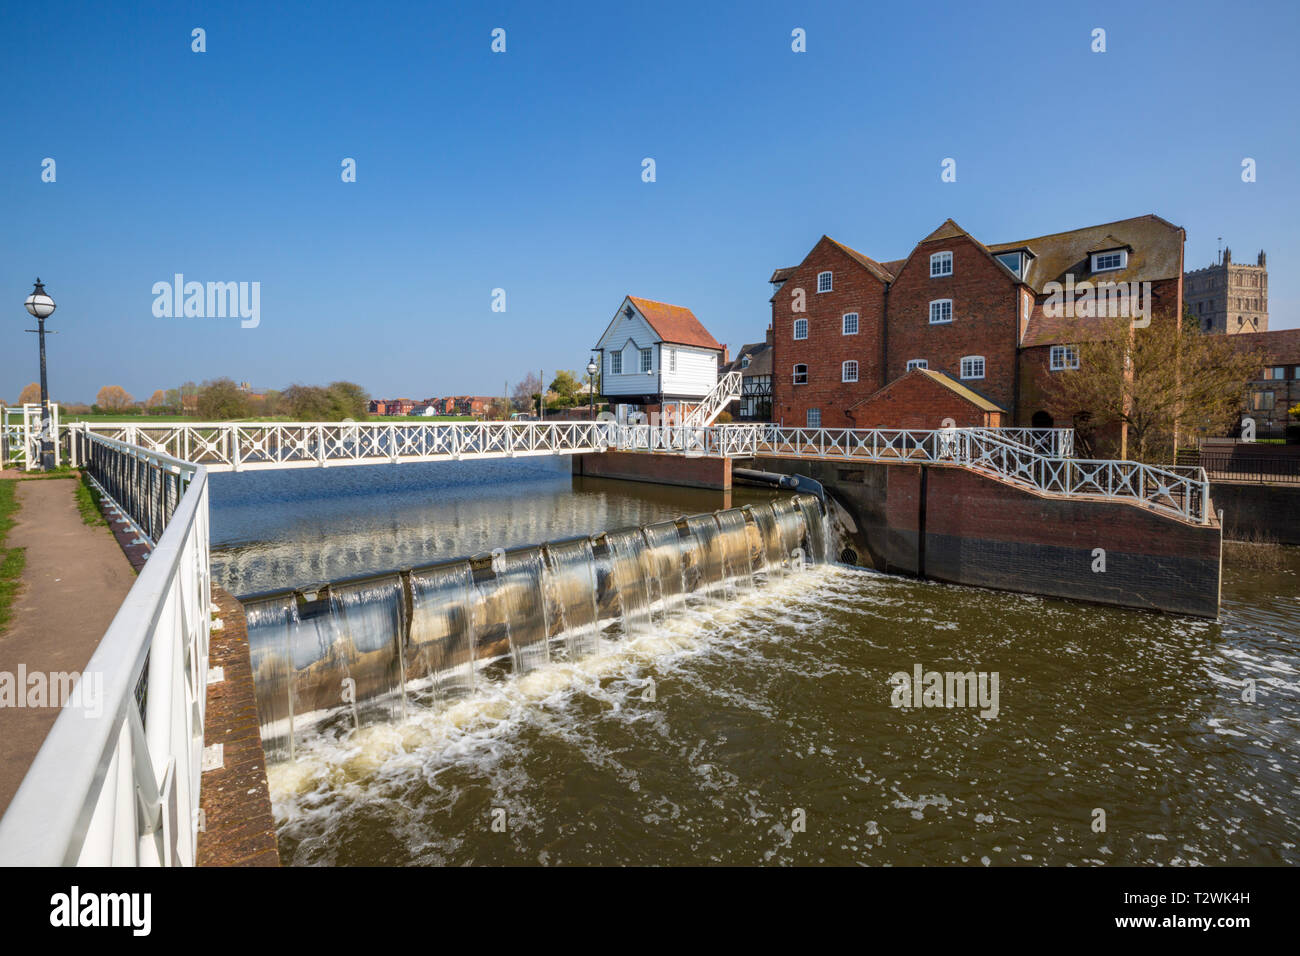 The Abbey Mill at Tewkesbury, Gloucestershire, England Stock Photo